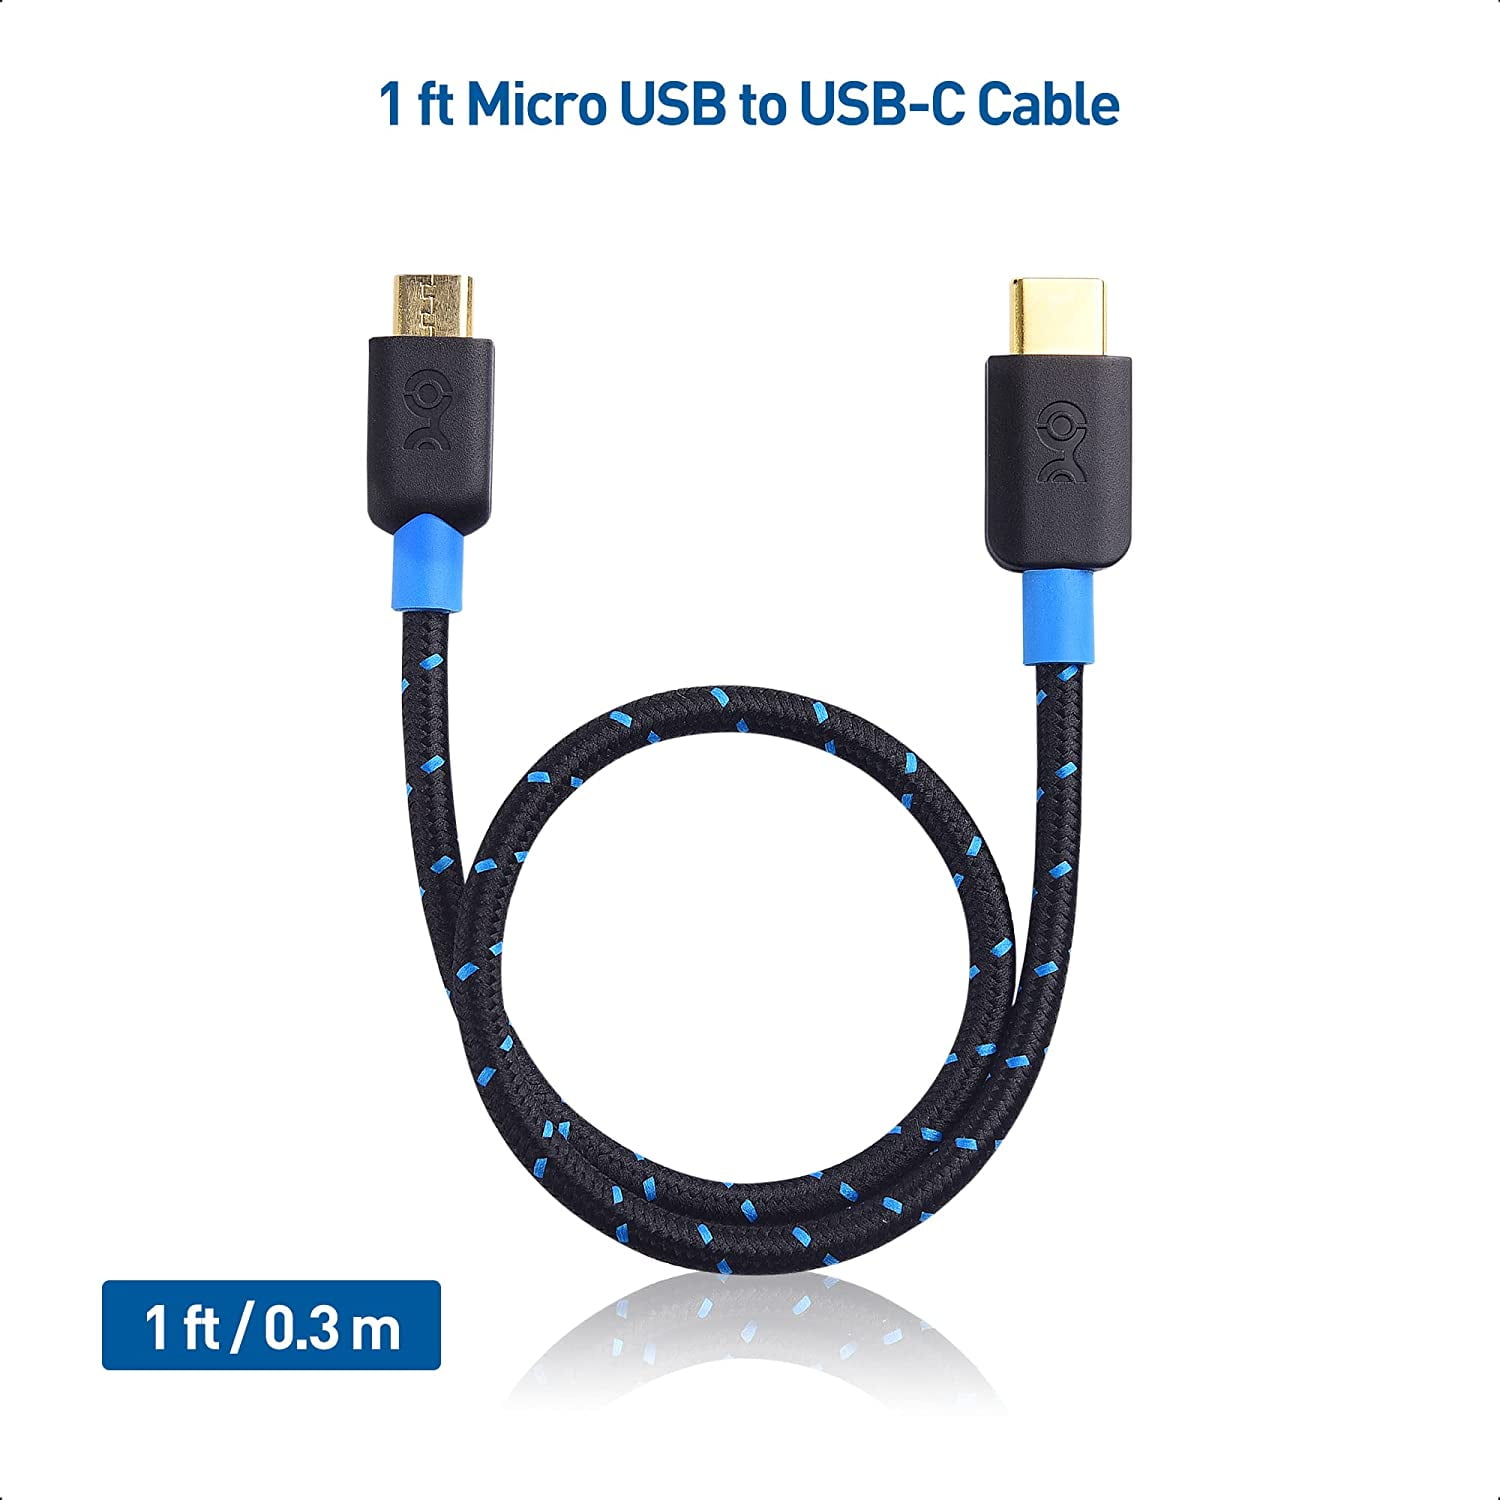 Cable Matters Cable Matters USB C to Micro USB Cable (Micro USB to USB-C Cable) with Braided Jacket 6.6 Feet Black - Walmart.com